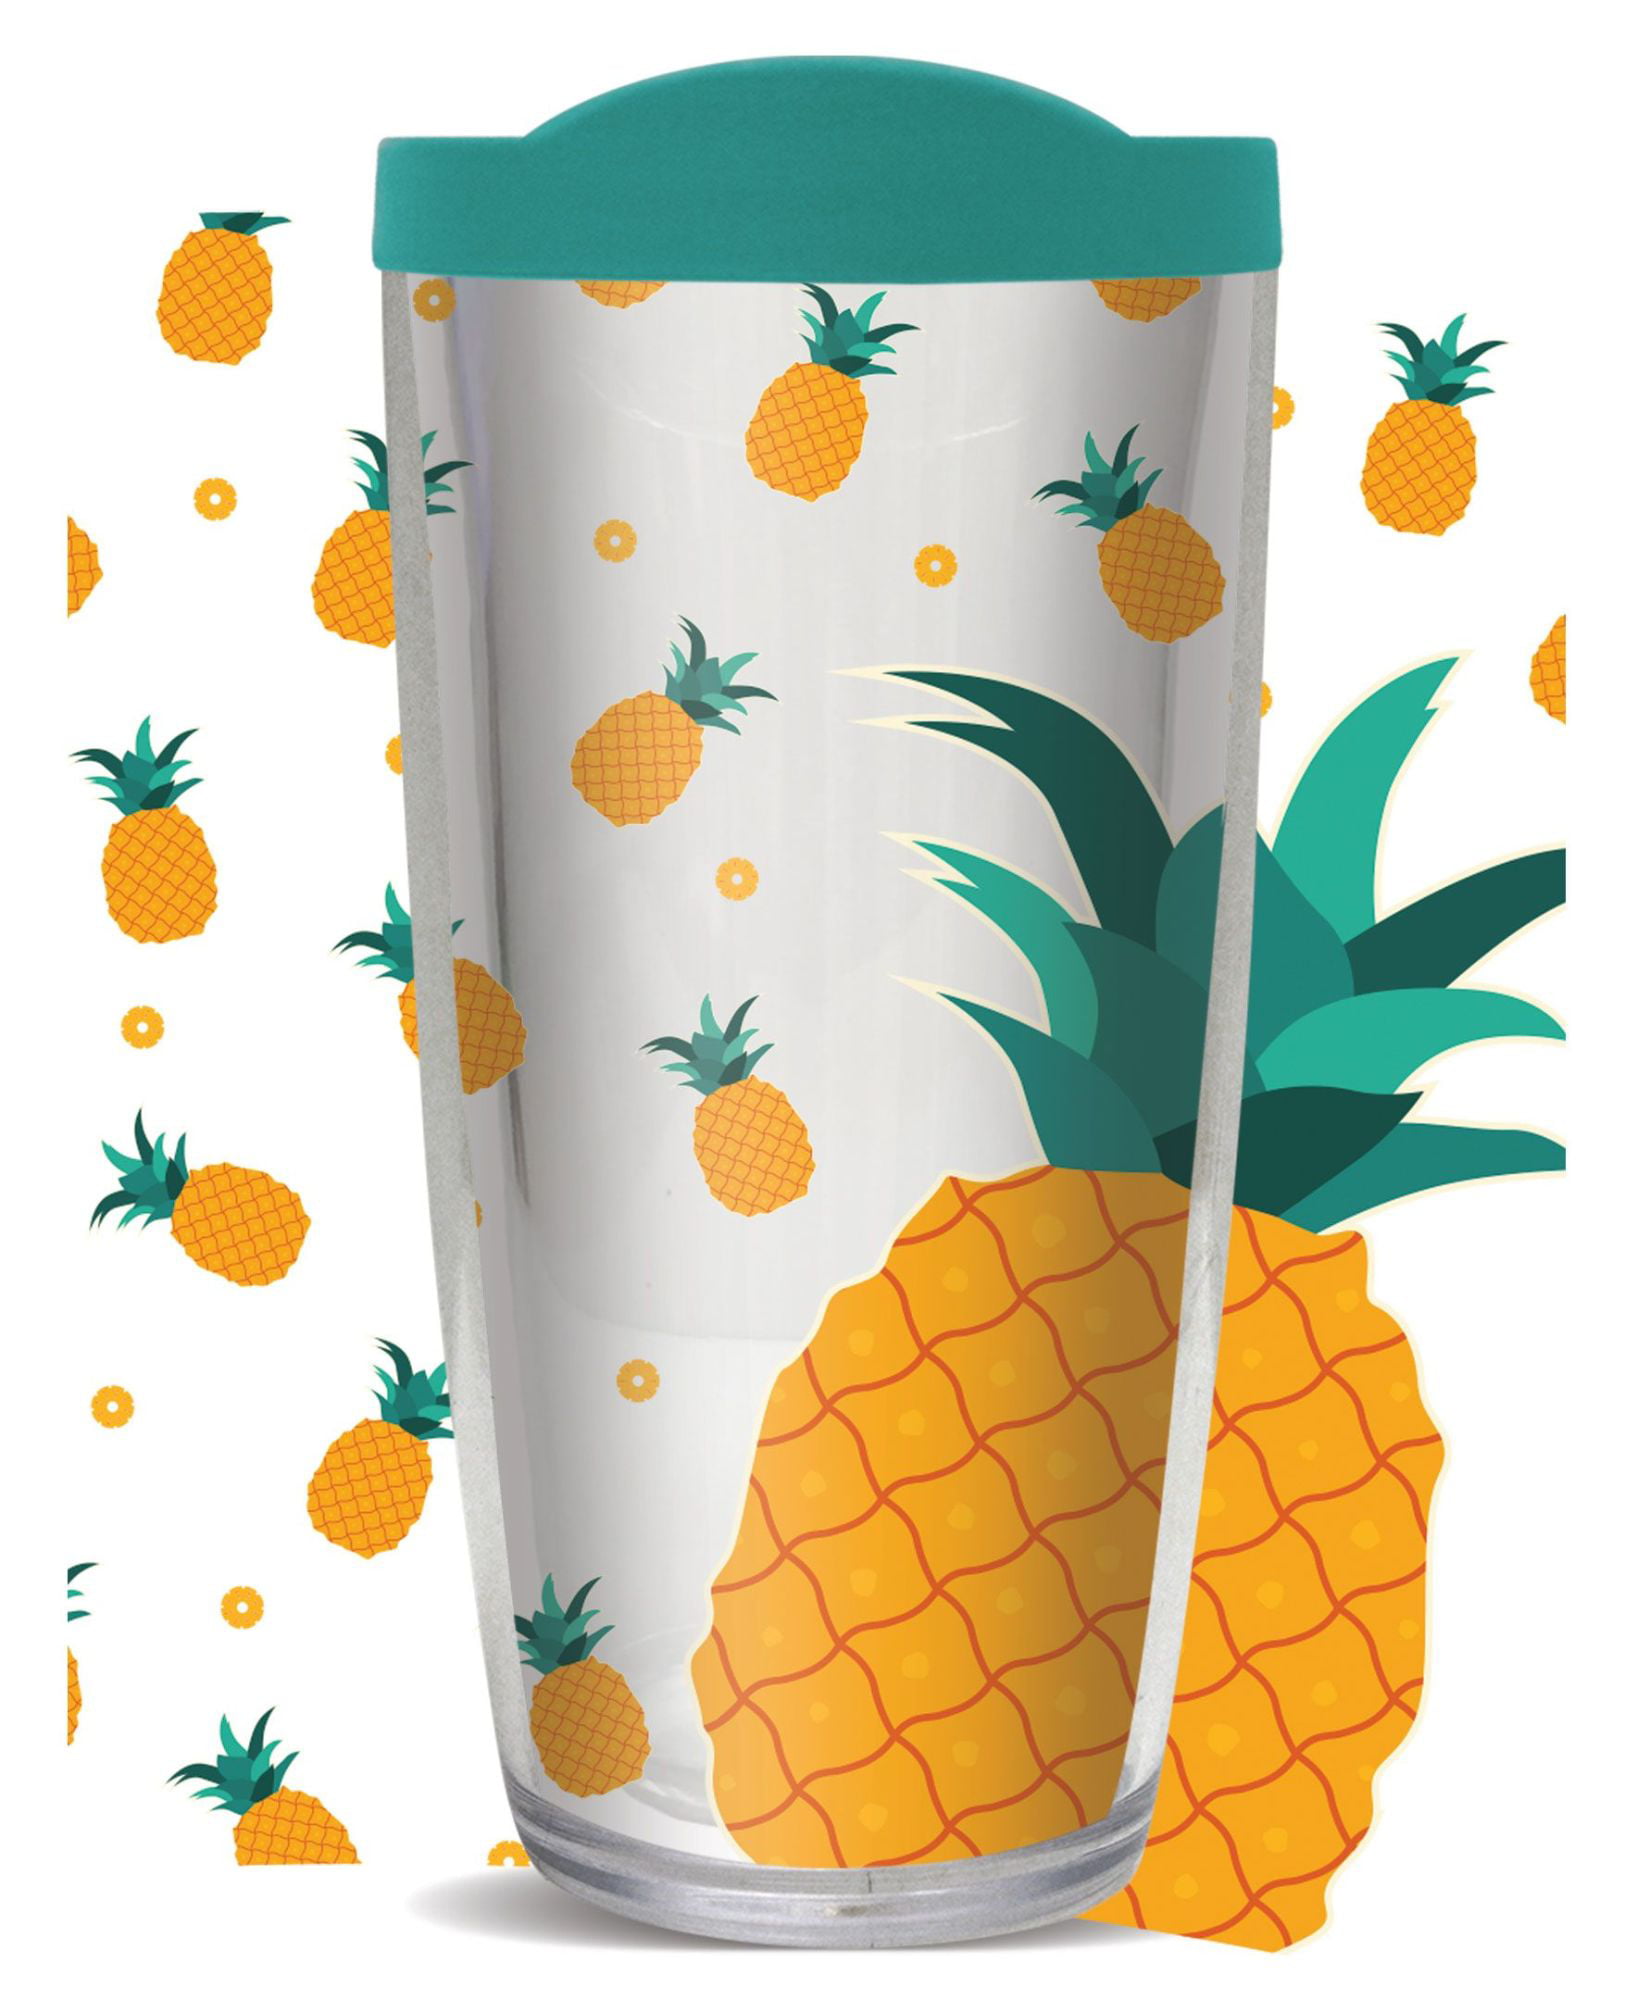 Hot Insulated Tumbler Holiday Gifts Cold Insulated Tumbler ED51-DM/AS21622 Pineapple Personalized Travel Tumbler